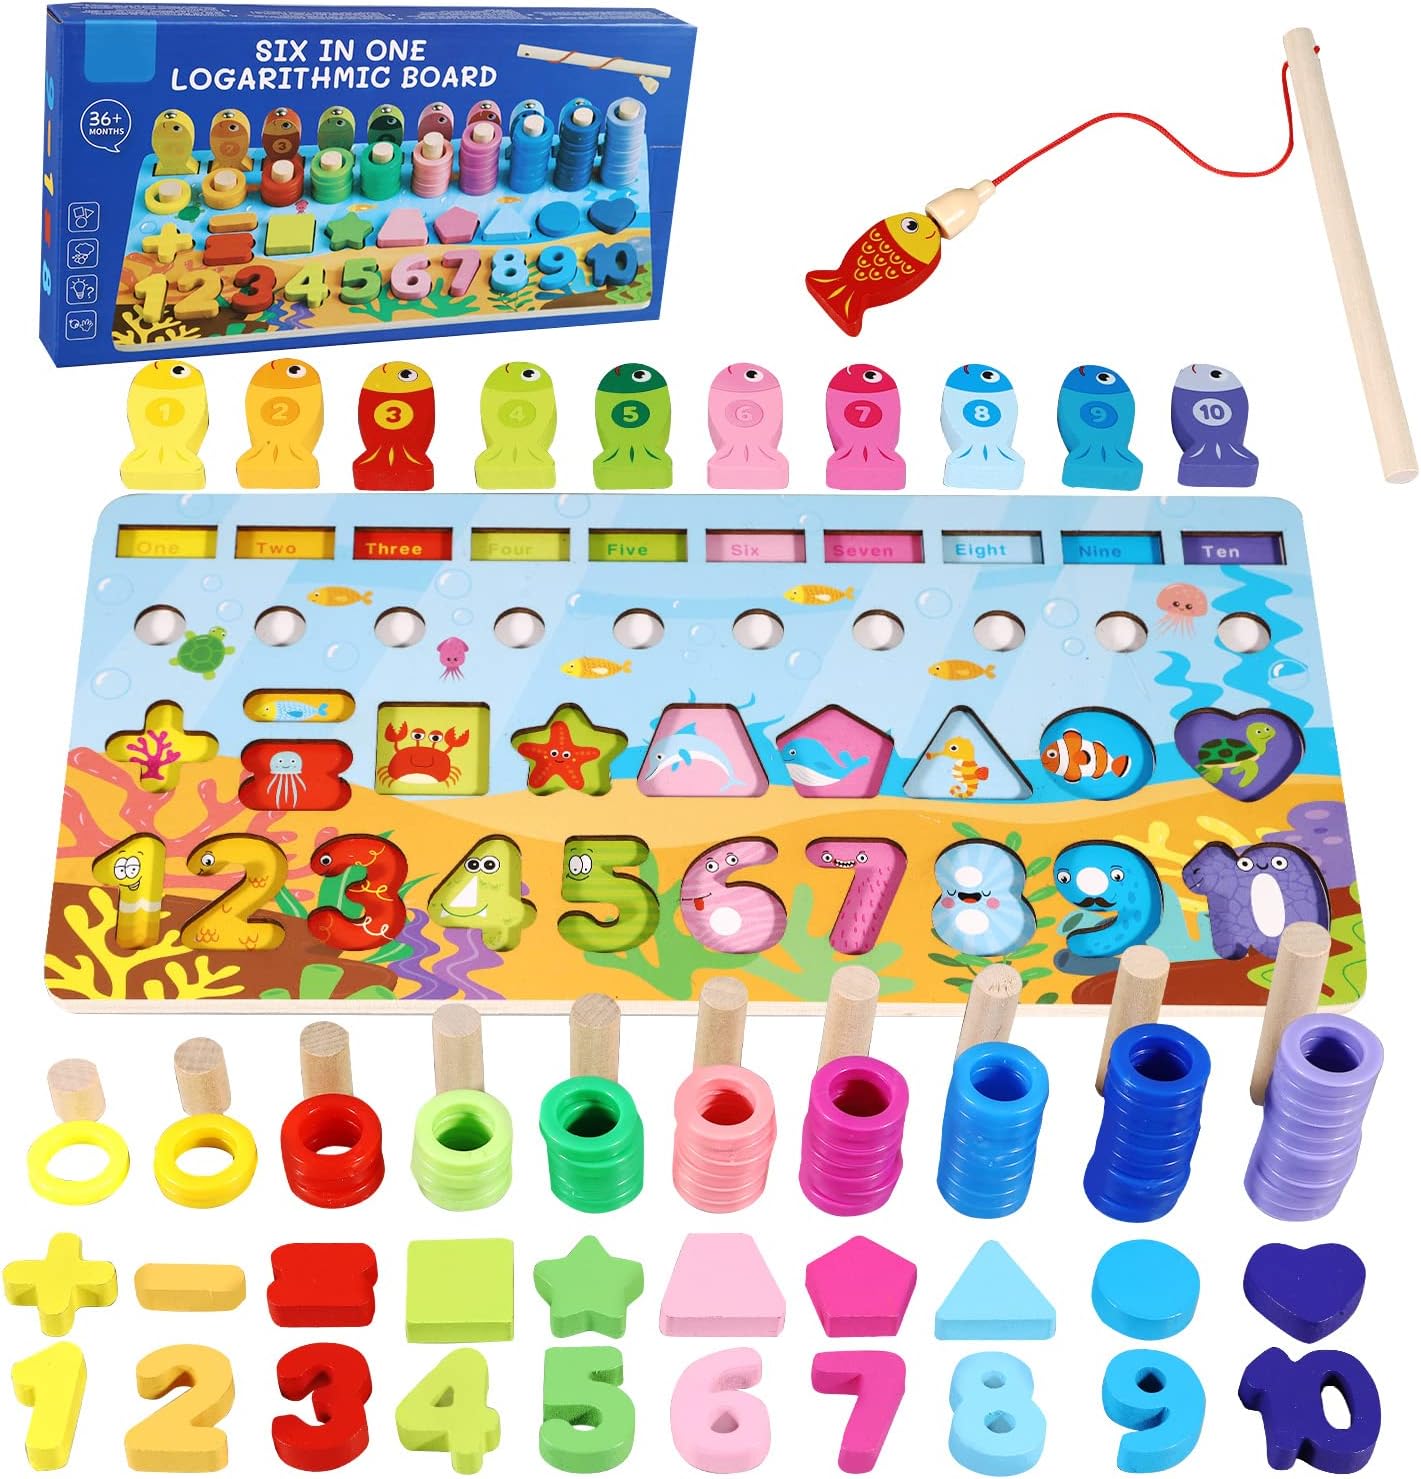 6 in 1 Wooden Montessori Learning Toy, Magnetic Fishing Game, 6-in-1 Wooden Blocks Puzzle Board Set Alphabet ABC, Numbers, Mathematical Signs and Letters for Toddlers Preschool Montessori Counting Educational Wooden Toy 36 m +